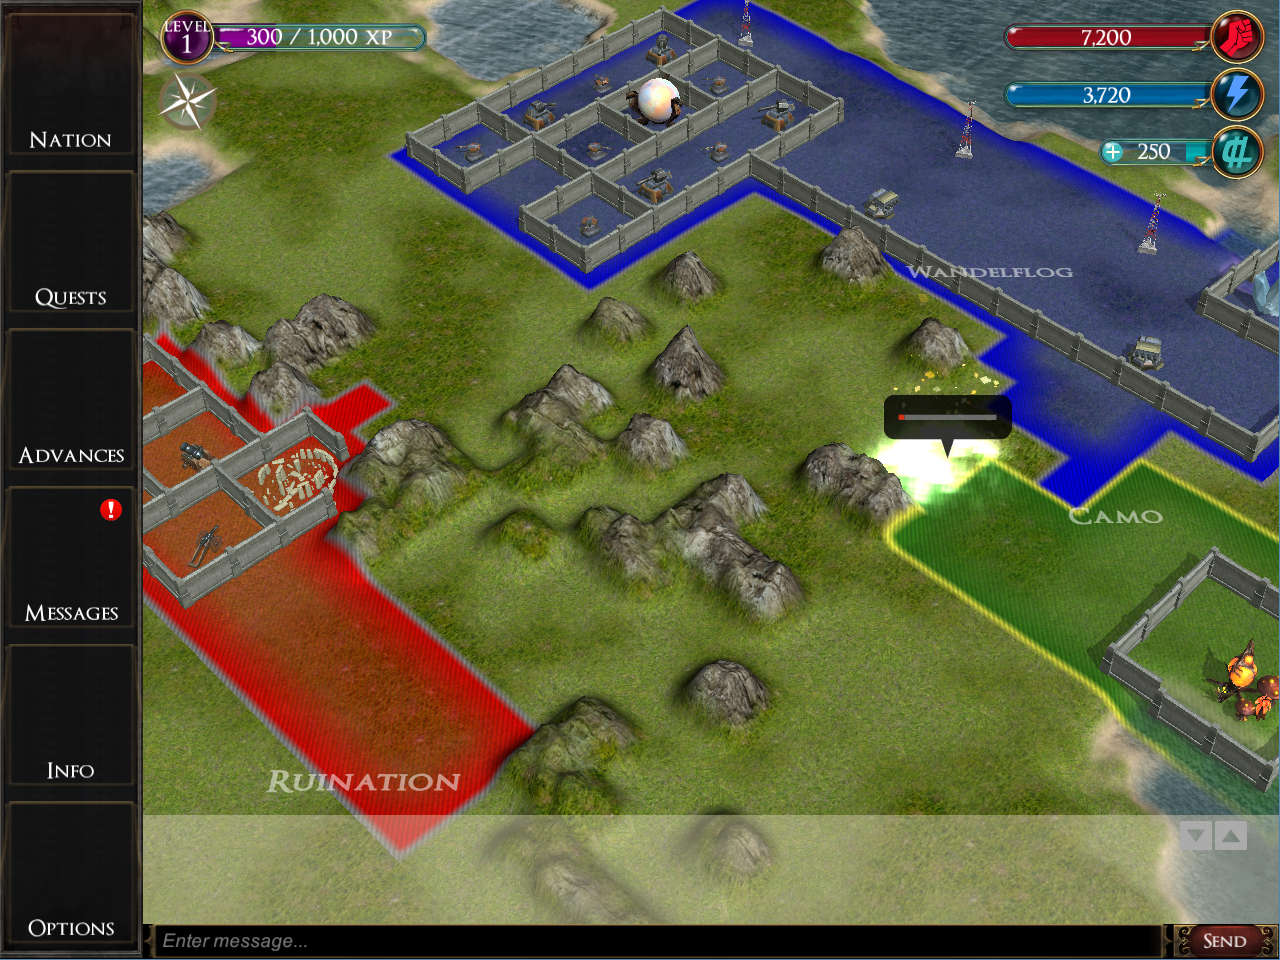 eDominations - Free Online Multiplayer Strategy Game